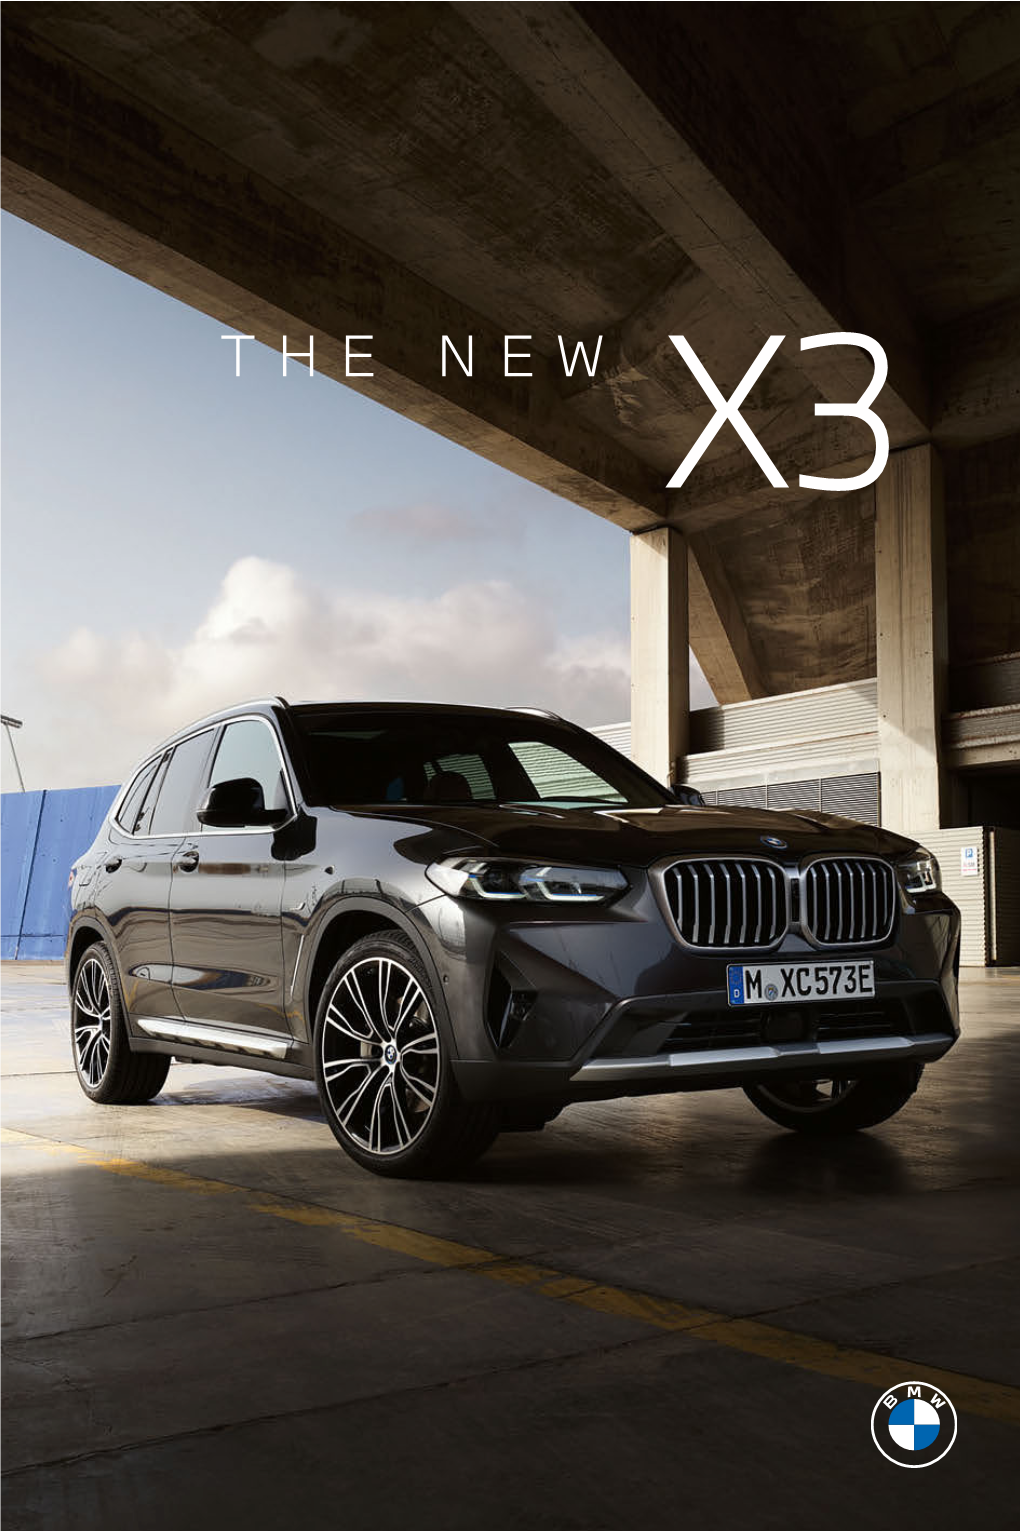 The New X3 Highlights Technical Values Your Bmw Journey Models Equipment and Services Brochures App